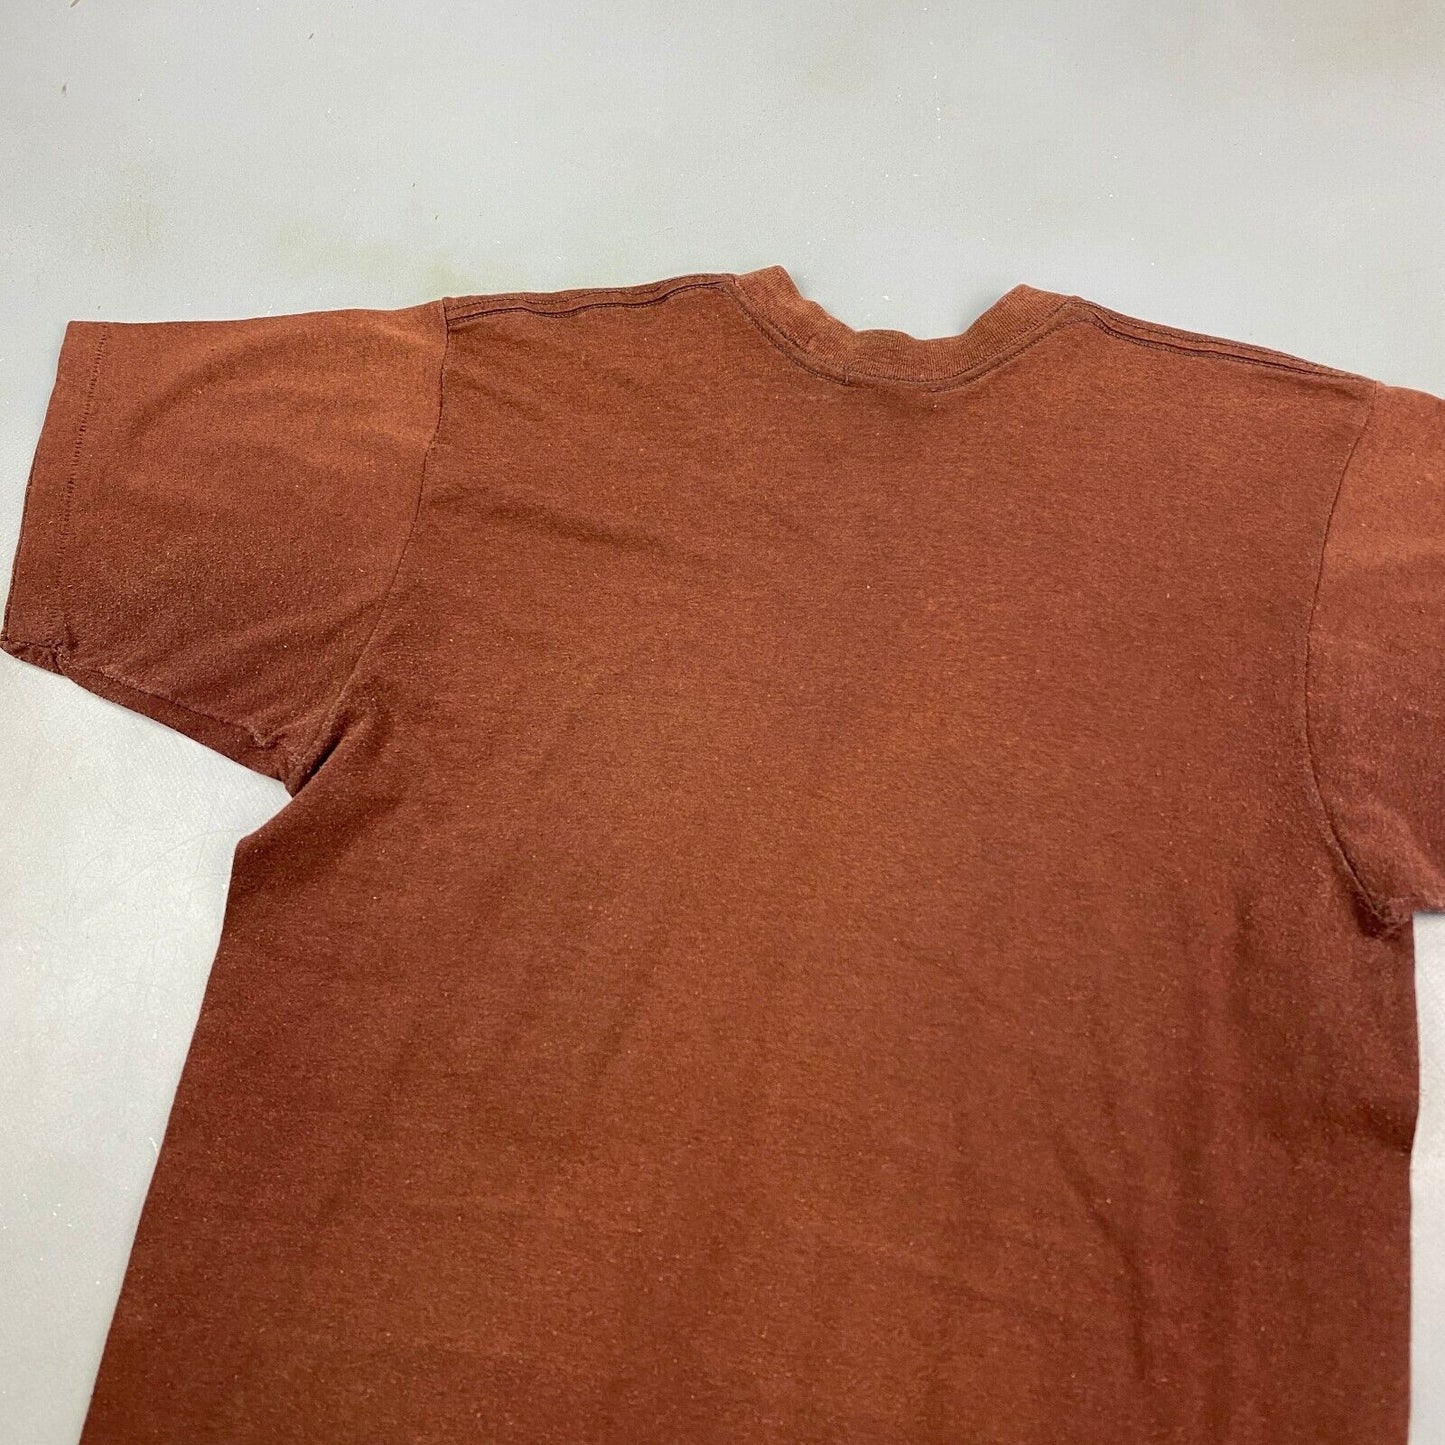 VINTAGE 90s Faded Brown Blank T-Shirt sz Small Men